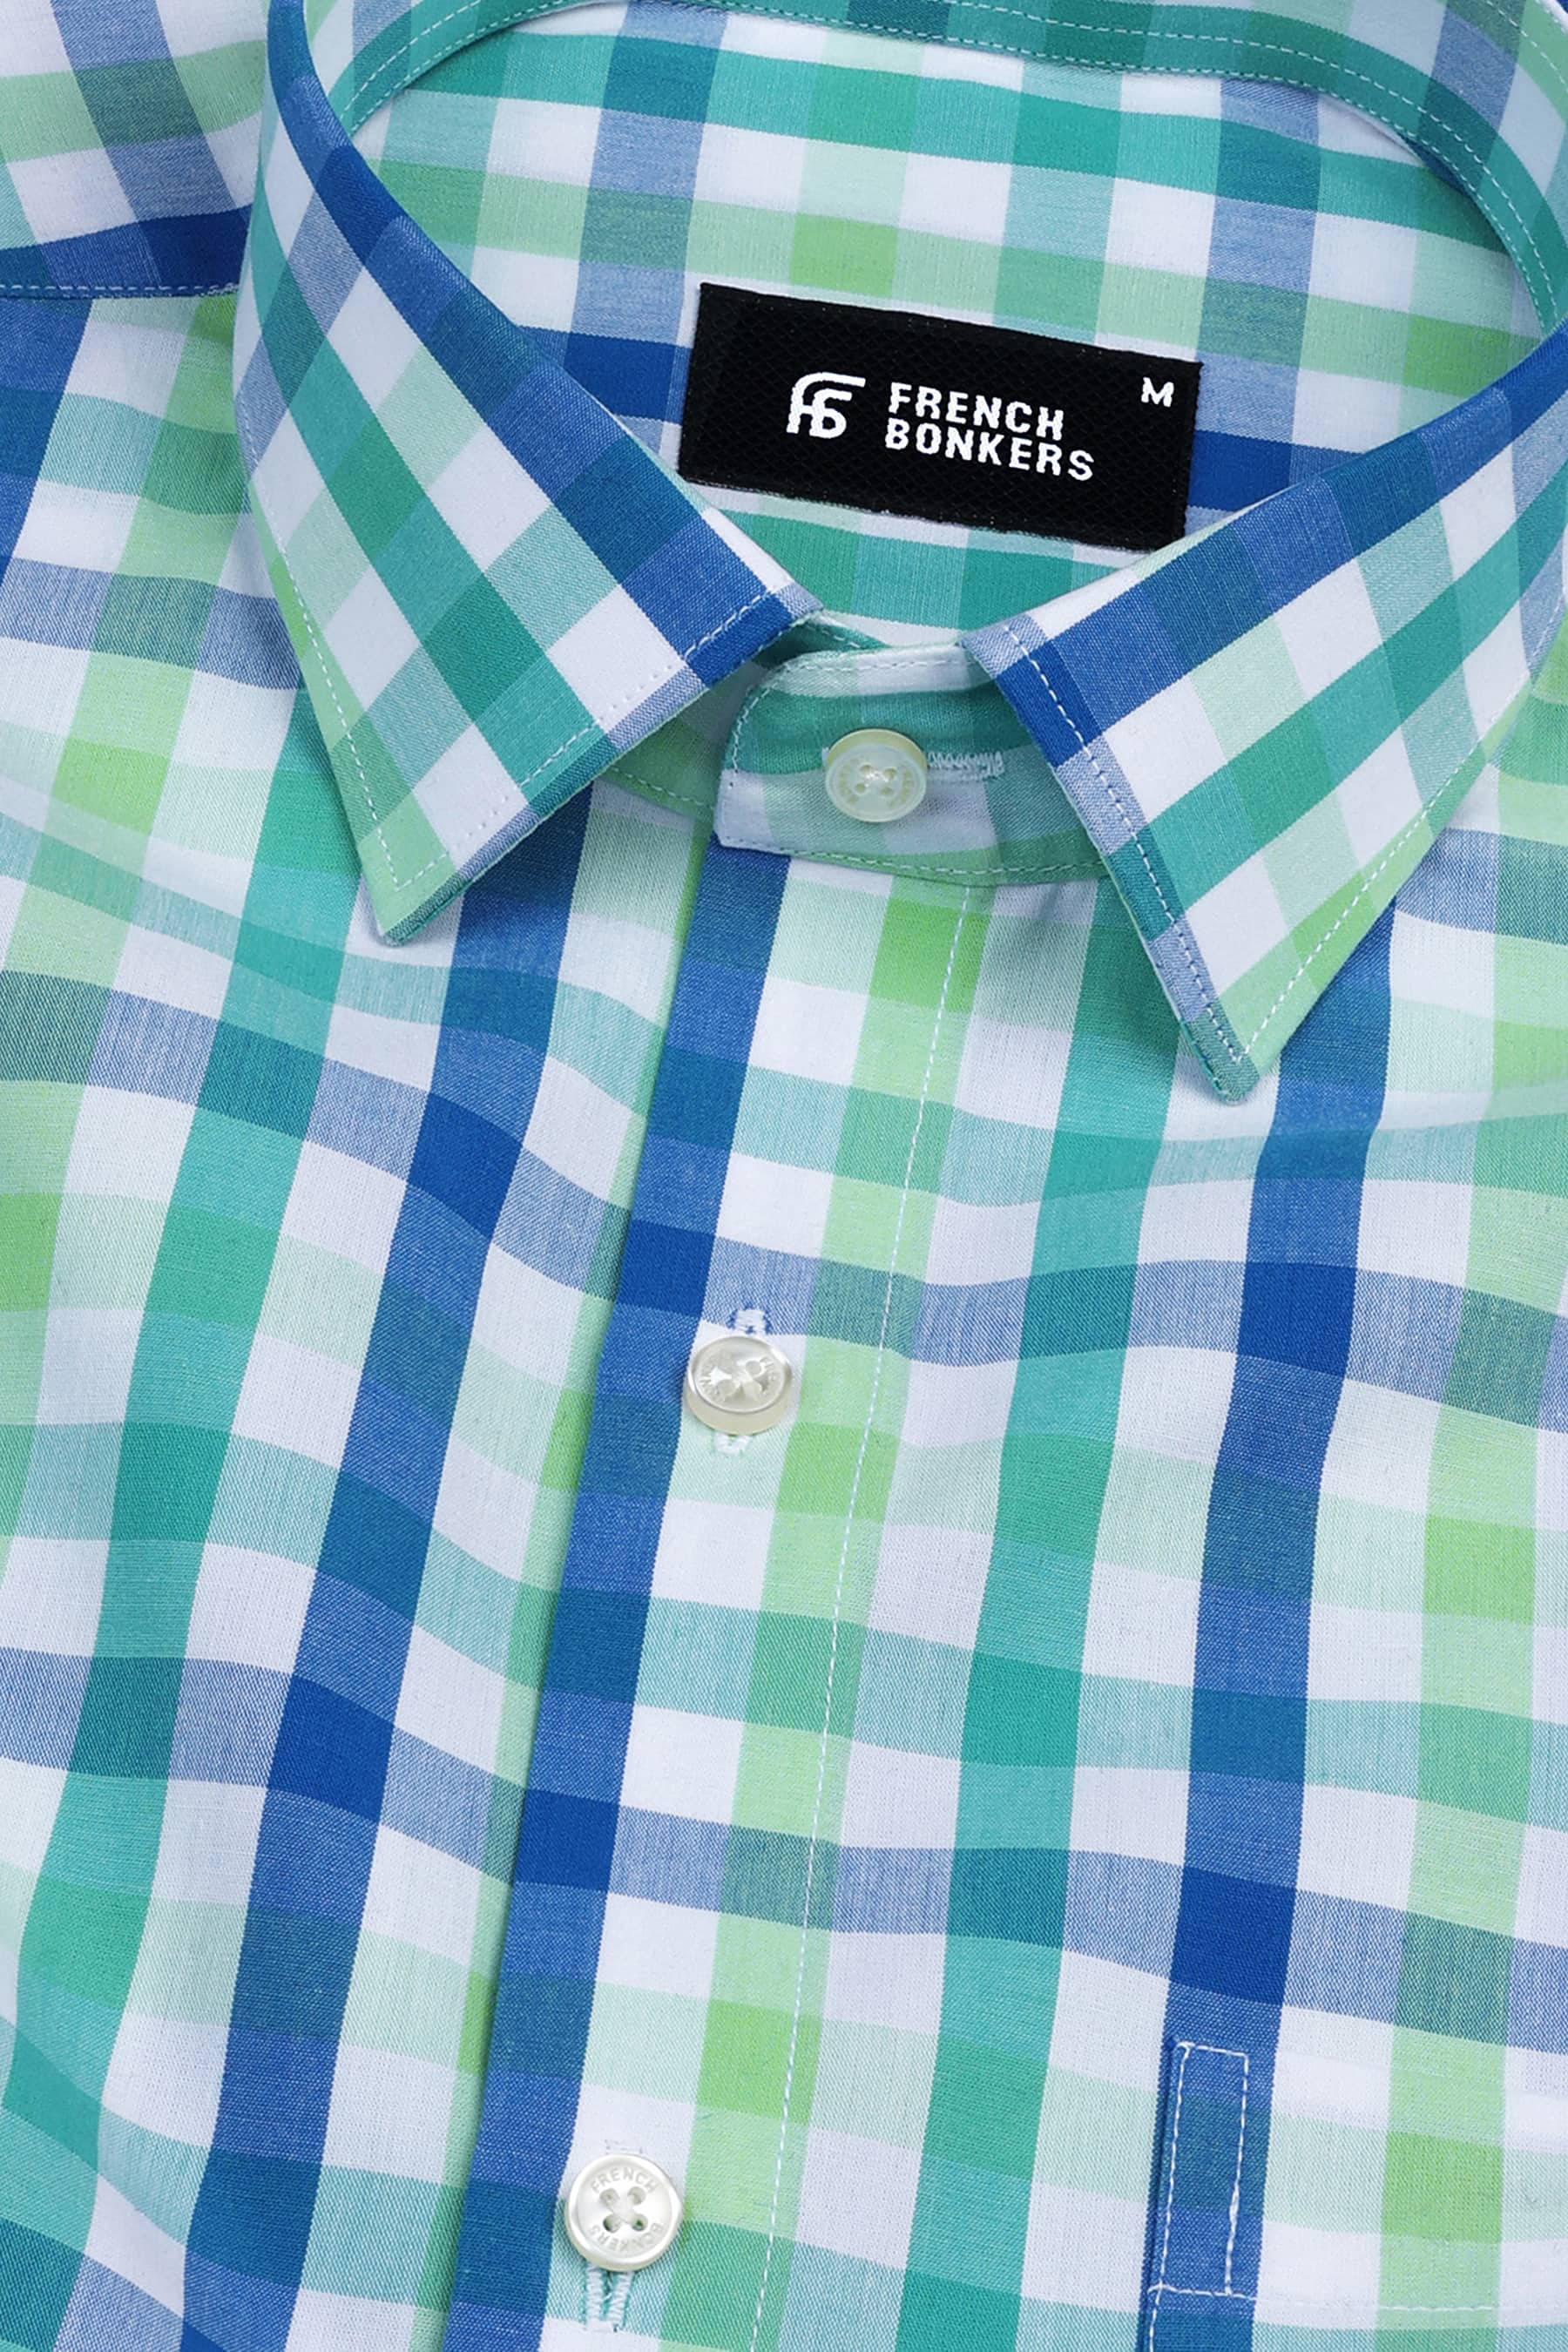 Parrot and leaf green with blue windowpane regular plaid check shirt